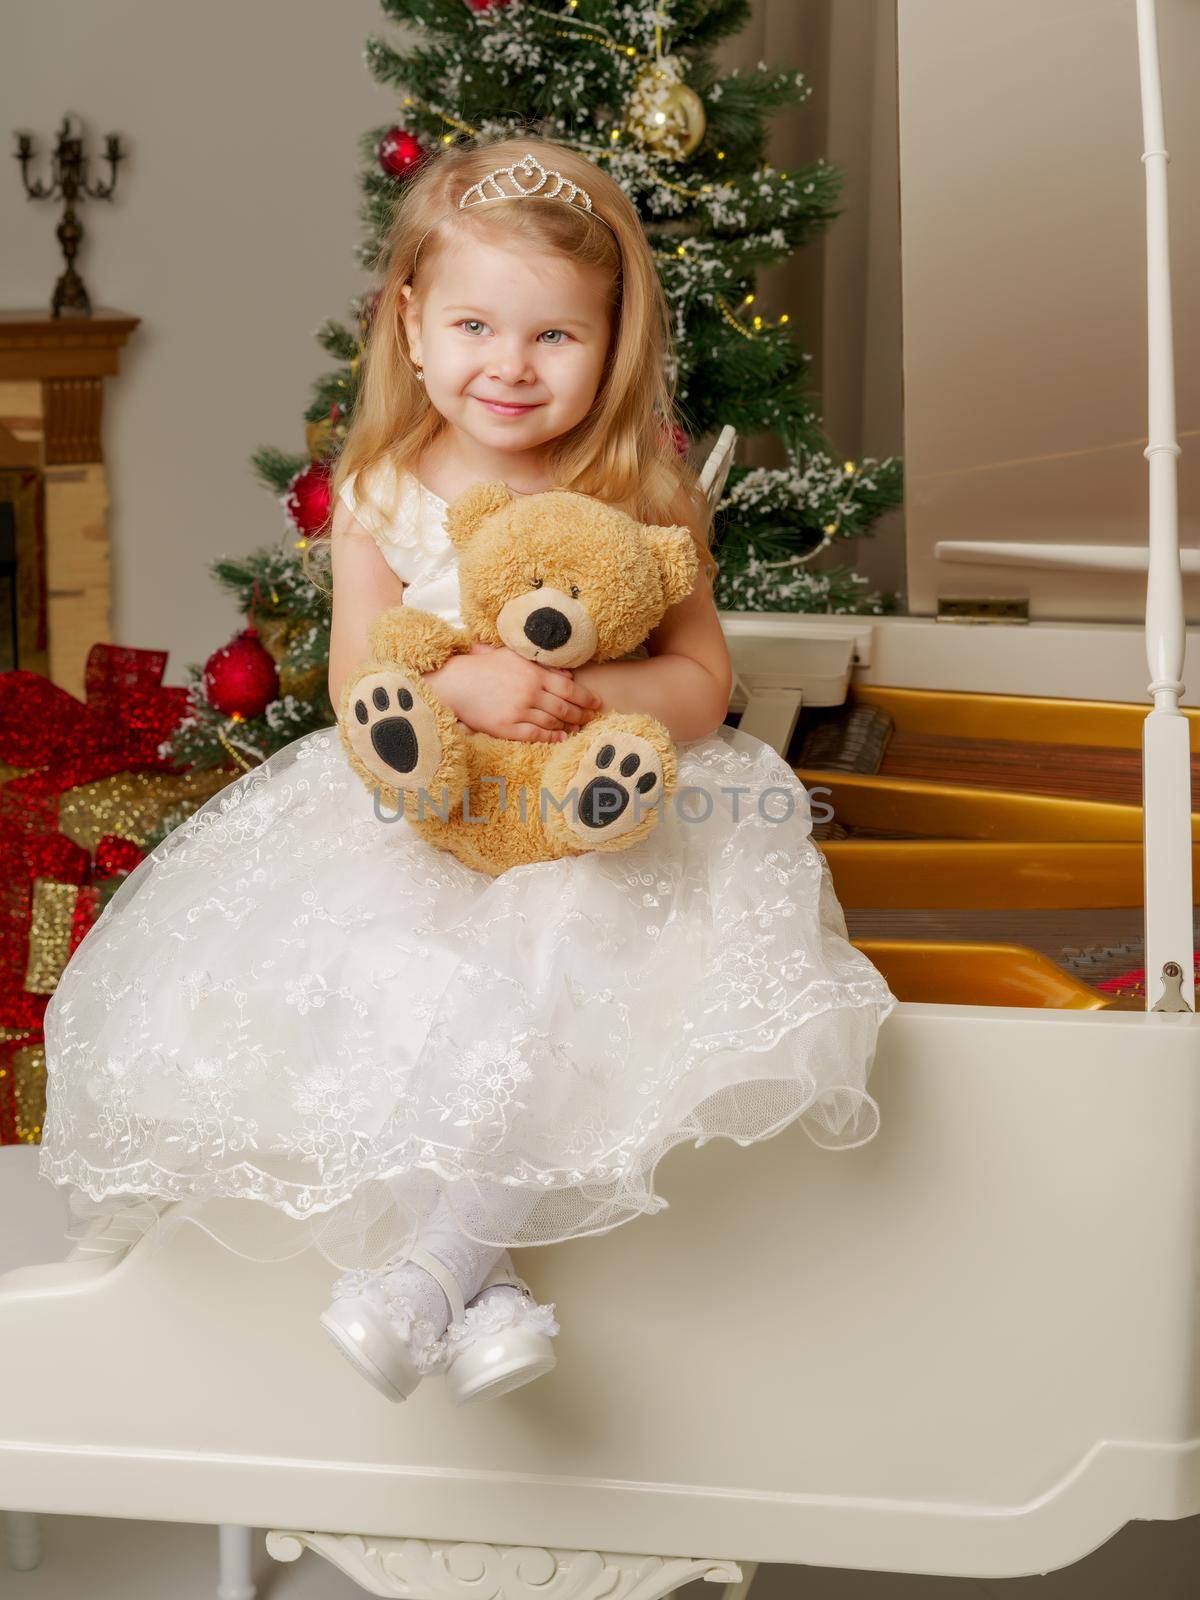 A little girl is sitting on a white piano with a teddy bear. by kolesnikov_studio